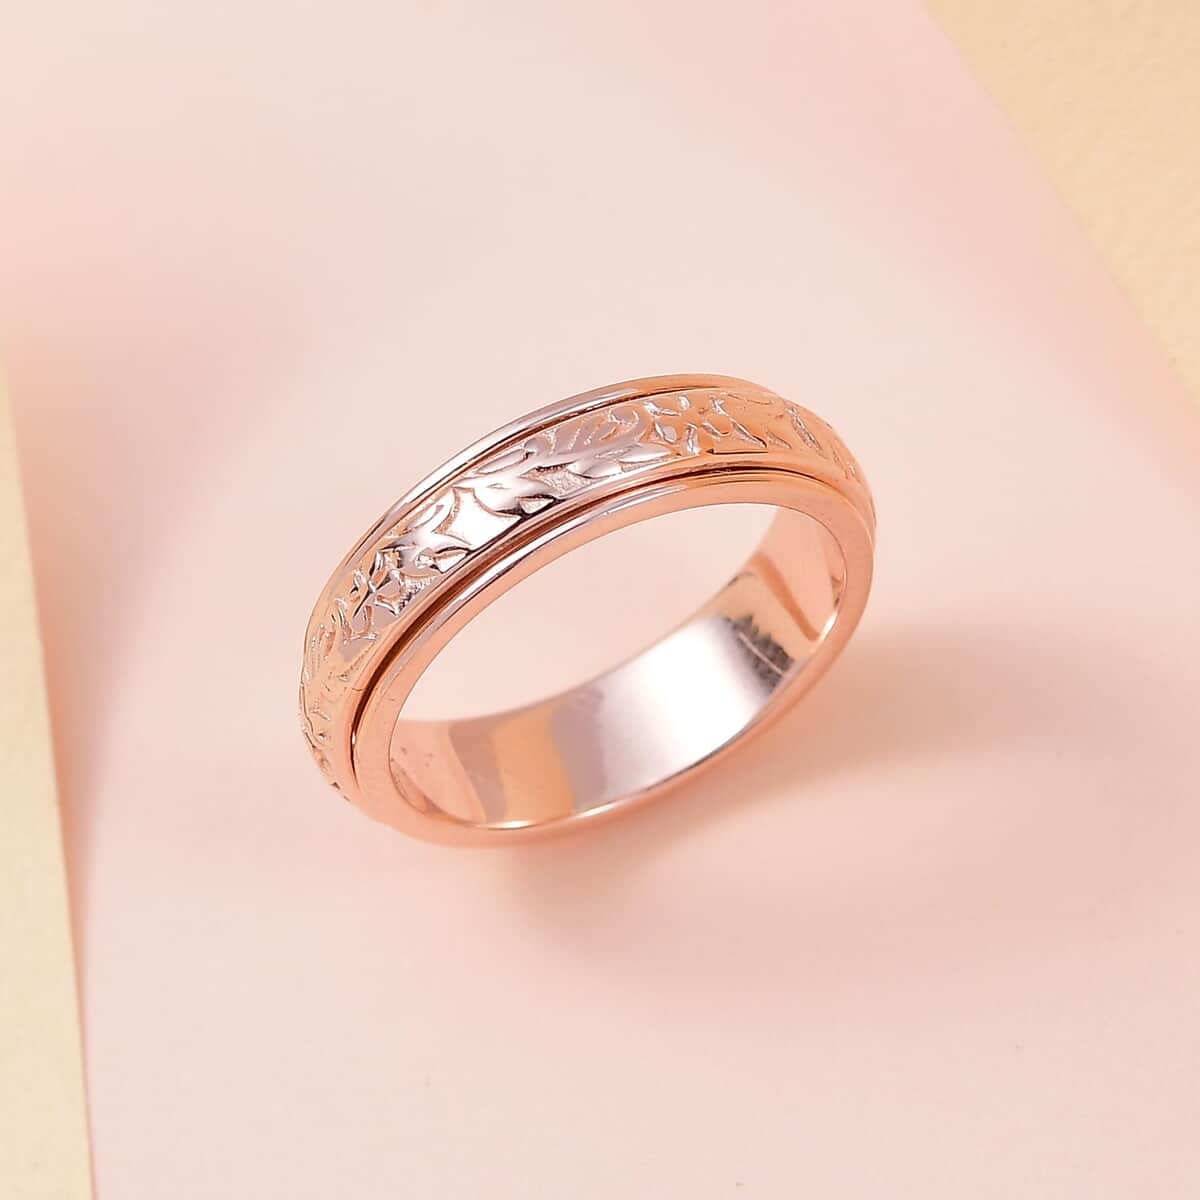 Floral Fidget Spinner Ring for Anxiety in Vermeil Rose Gold Over Sterling Silver, Anxiety Ring for Women, Fidget Rings for Anxiety, Promise Rings 4.50 Grams (Size 6.00) image number 1